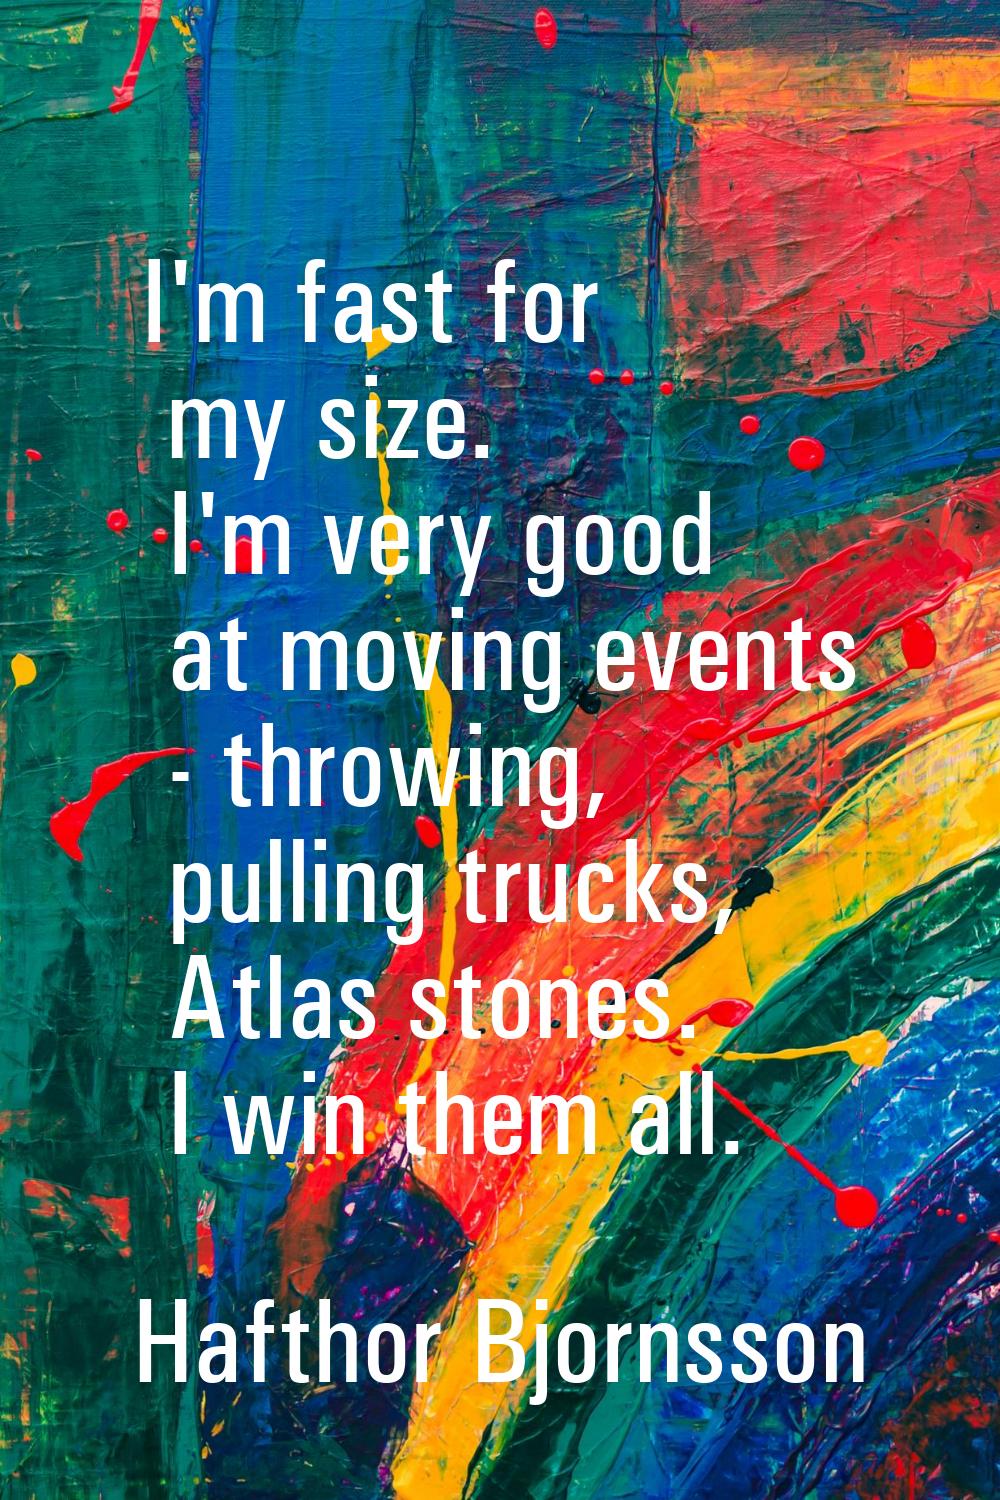 I'm fast for my size. I'm very good at moving events - throwing, pulling trucks, Atlas stones. I wi